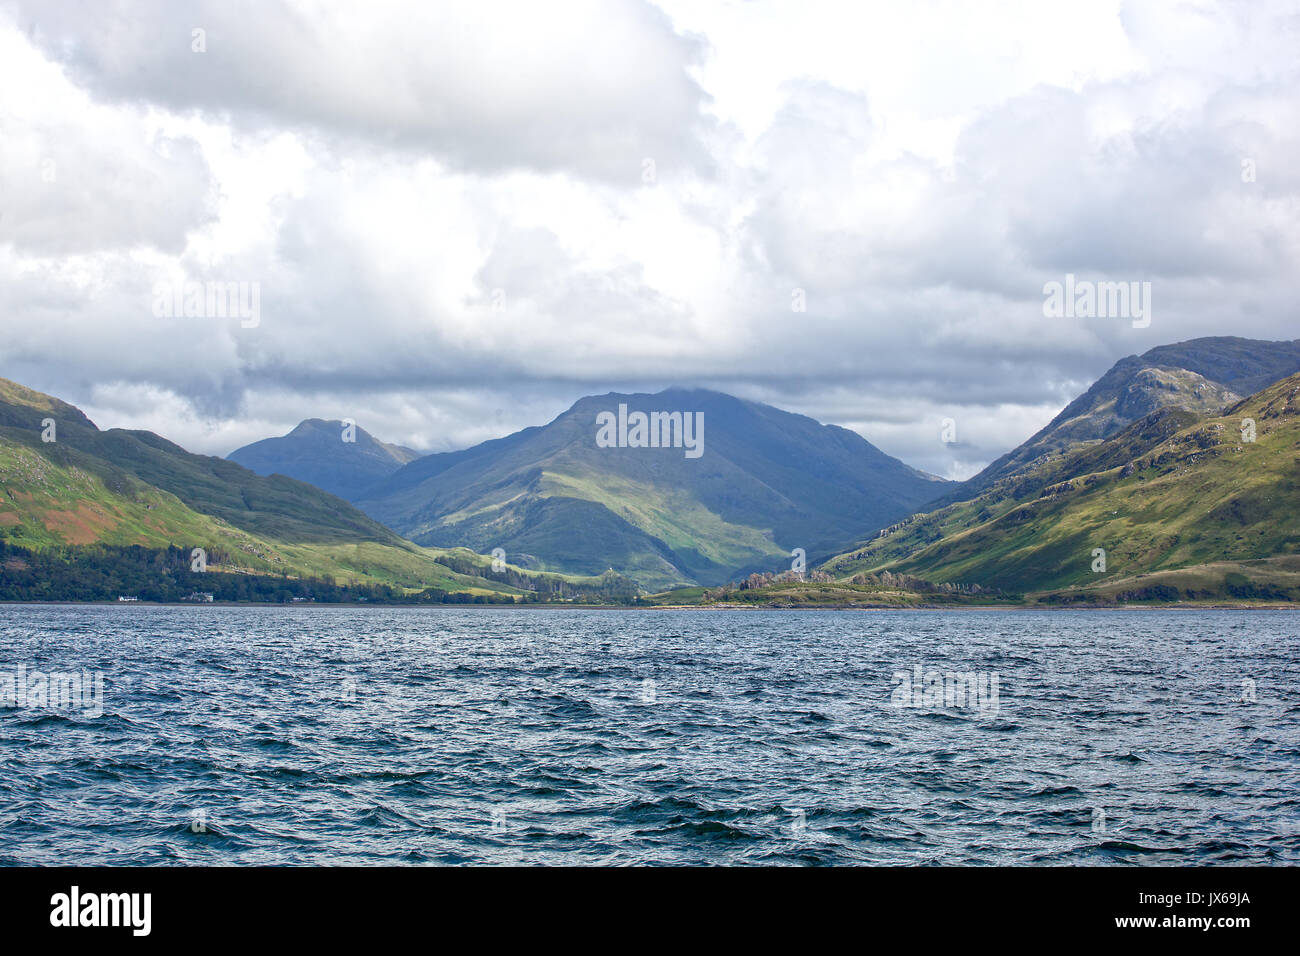 Mallaig Ferry Crossing to The Olde Forge, Inverurie, Scotland Stock Photo